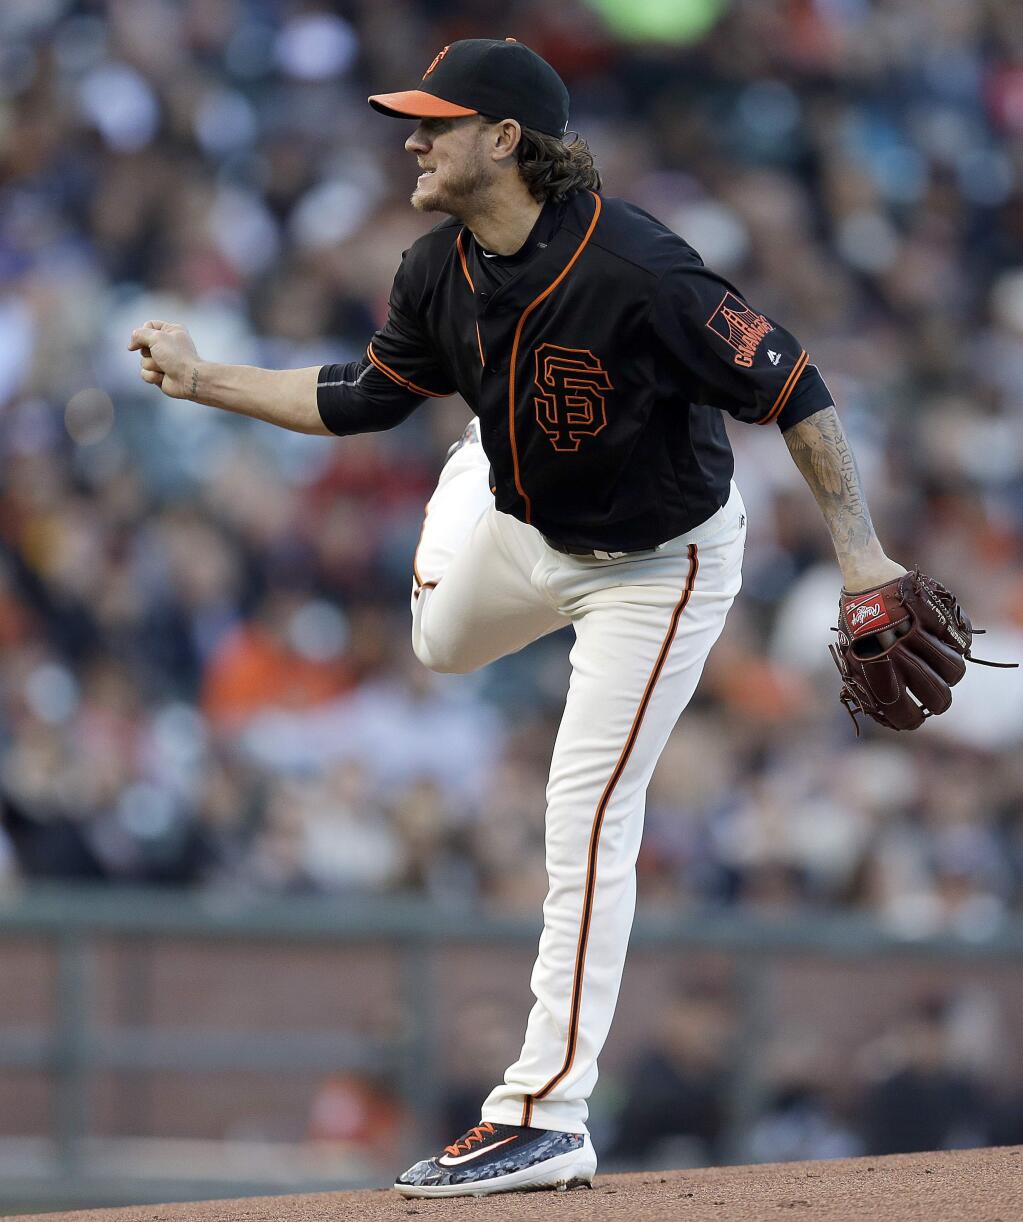 San Francisco Giants pitcher Jake Peavy works watches a delivery to the Miami Marlins during the first inning of a baseball game Saturday, April 23, 2016, in San Francisco. (AP Photo/Ben Margot)